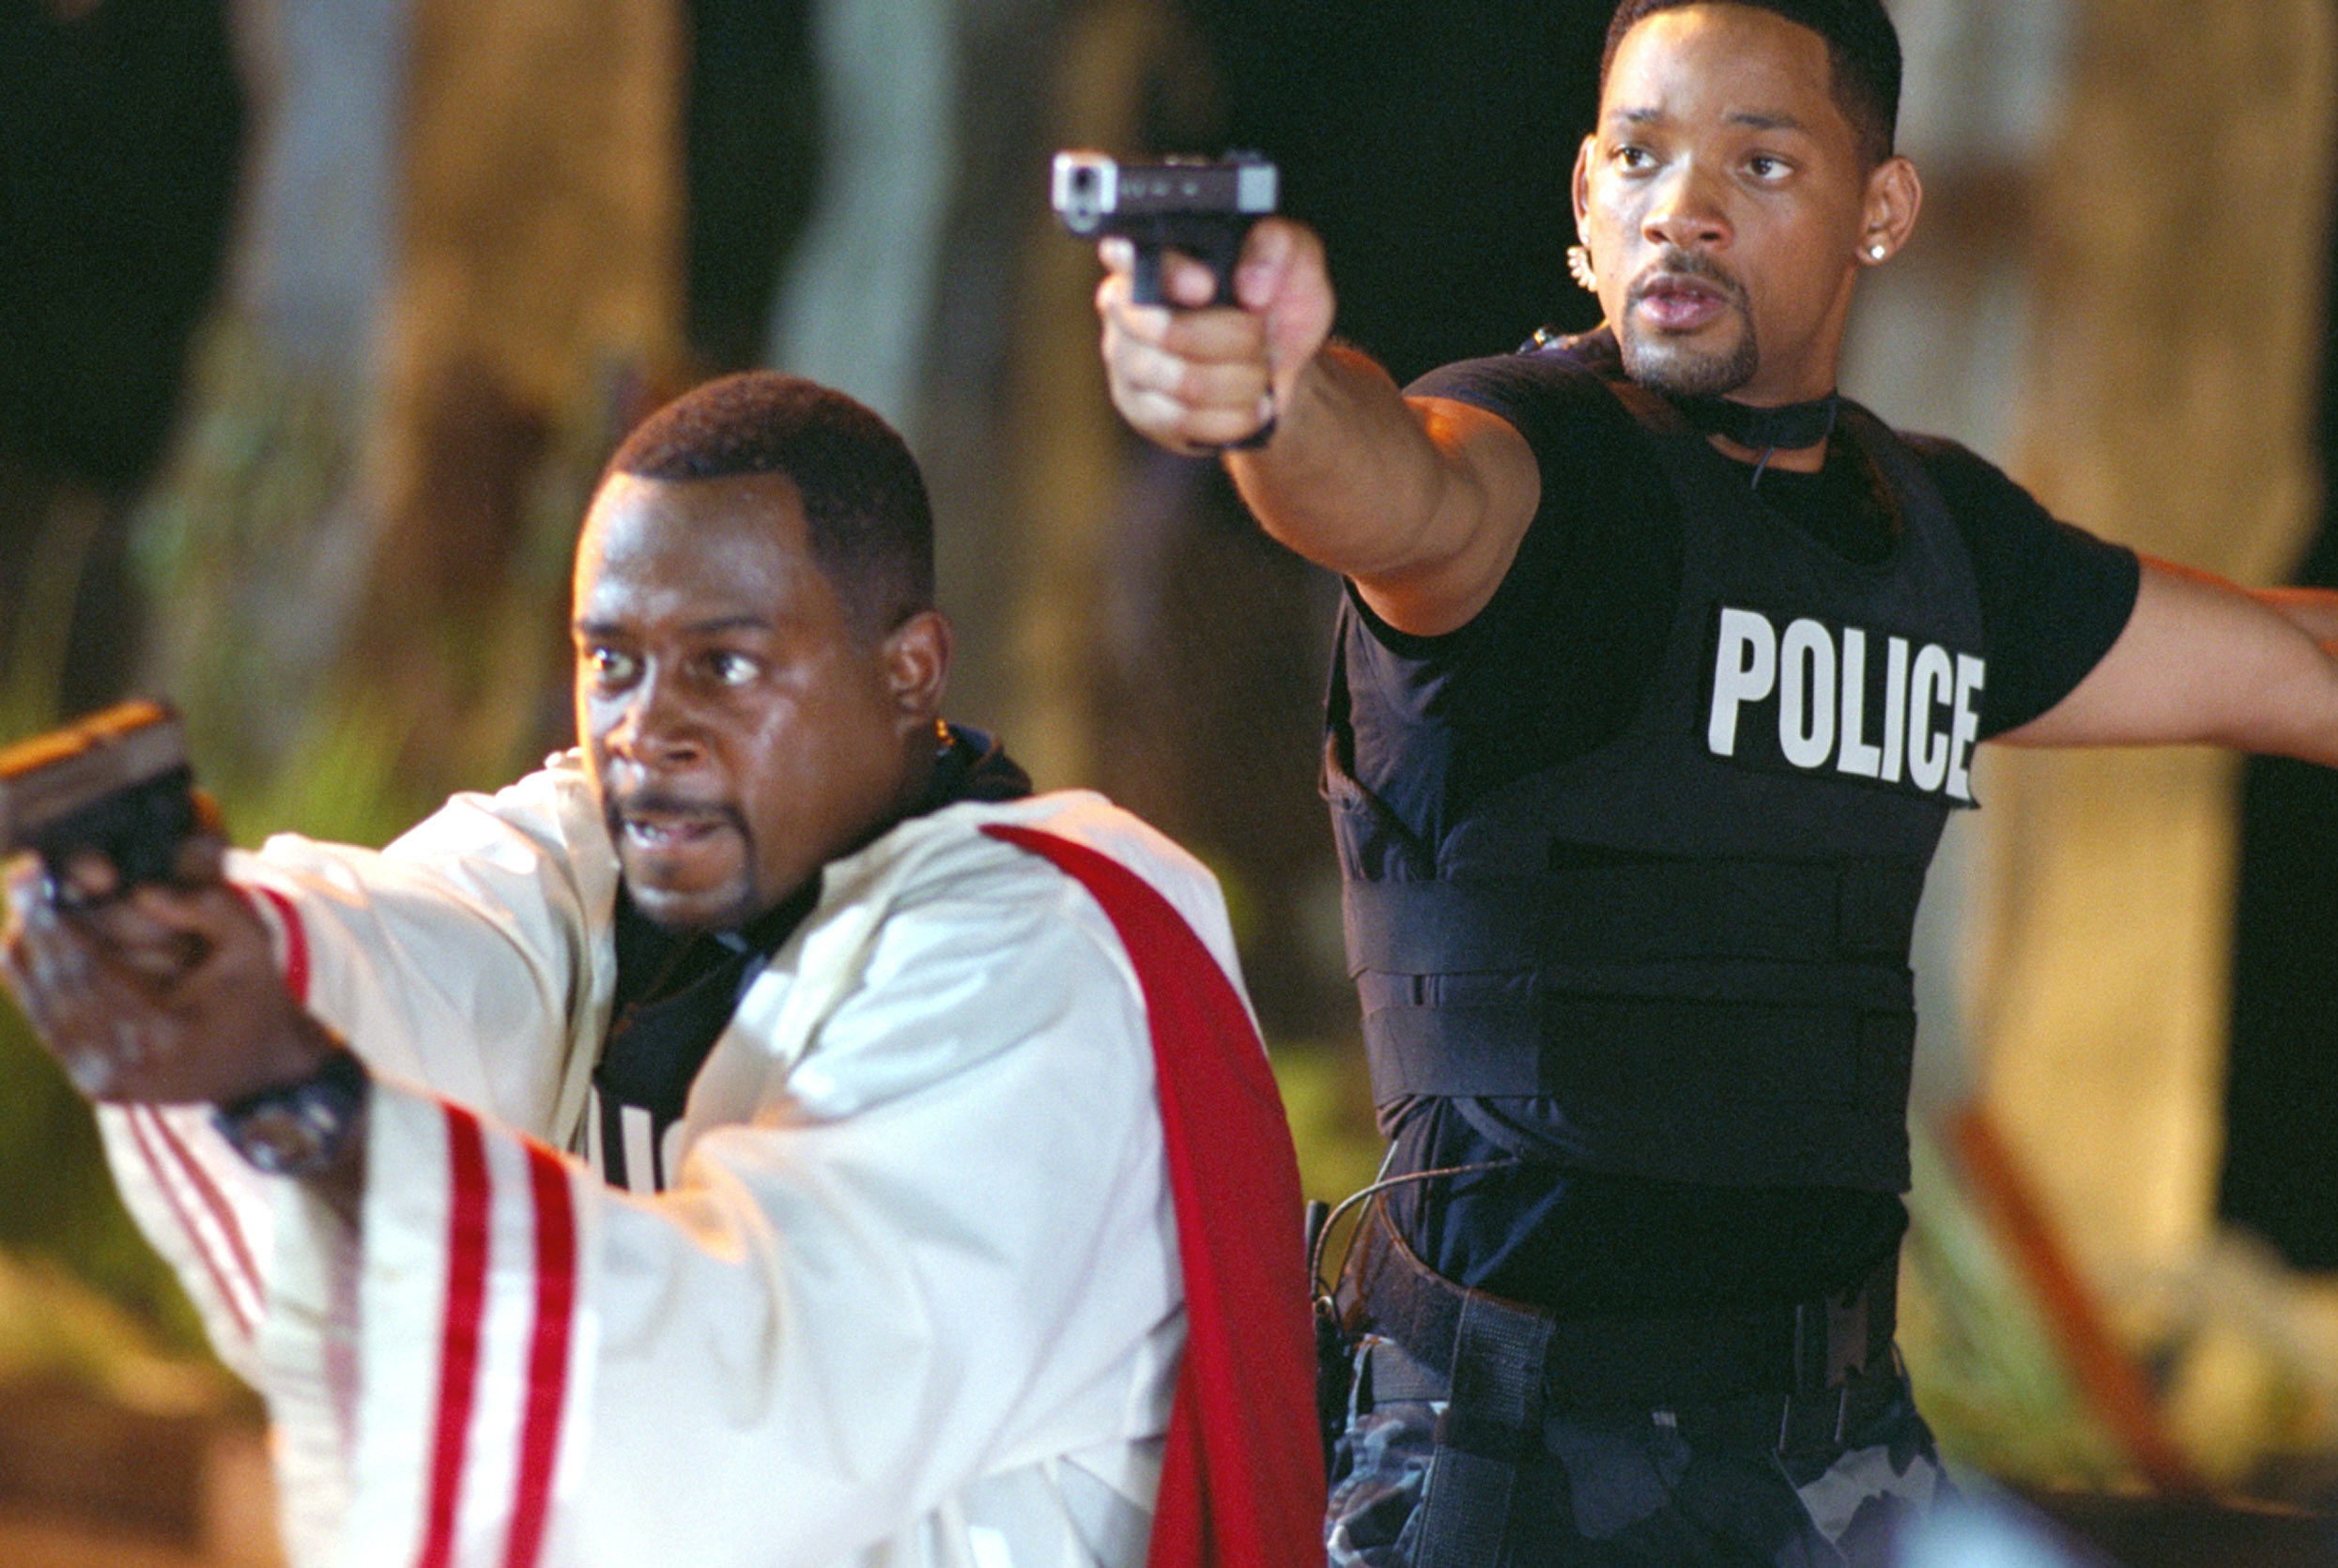 Martin Lawrence and Will Smith pointing guns.